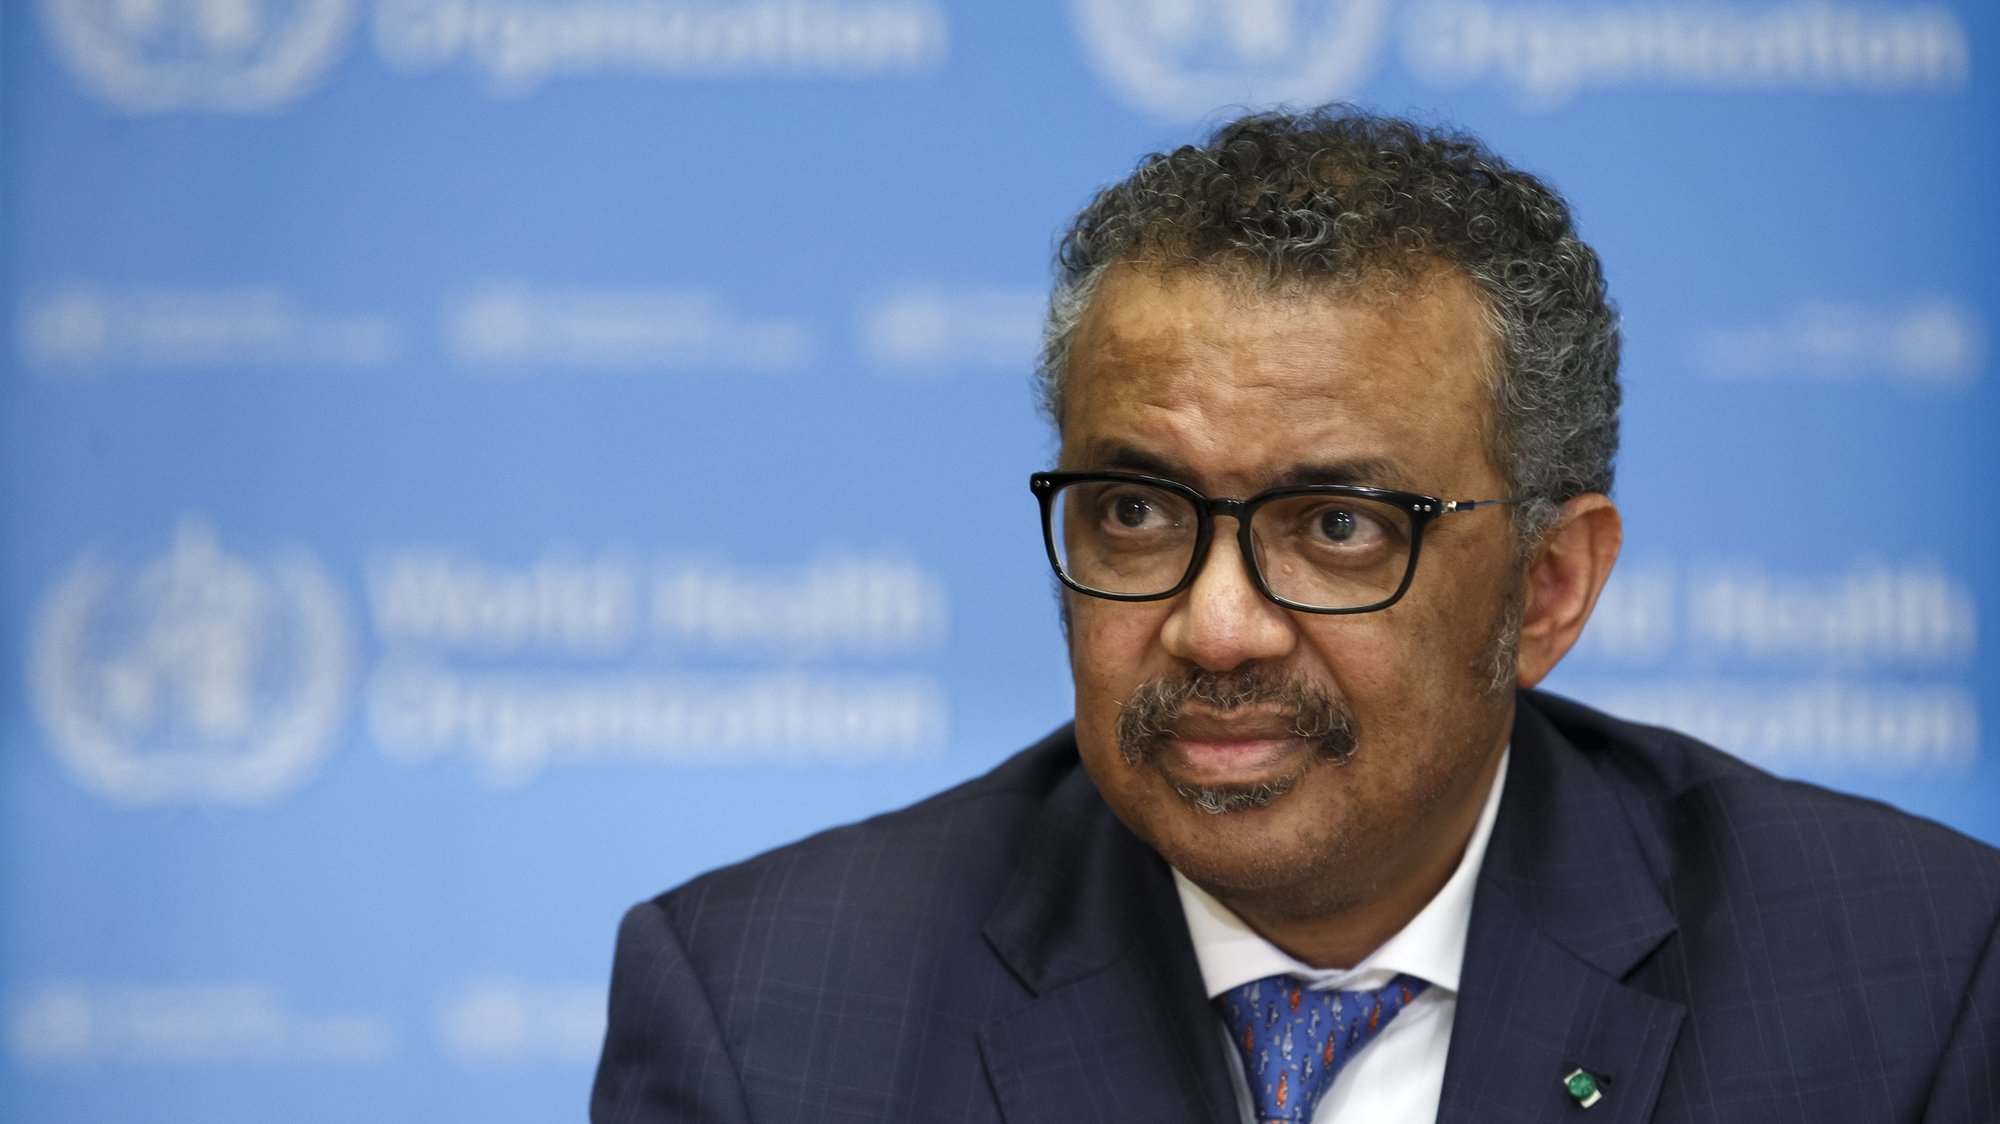 epa08824262 (FILE) - Tedros Adhanom Ghebreyesus, Director General of the World Health Organization (WHO), informs to the media about the update on the situation regarding the COVID-19 (previously named novel coronavirus (2019-nCoV)), during a press conference at the World Health Organization (WHO) headquarters in Geneva, Switzerland, 17 February 2020  (reissued 16 November 2020. According to media reports on 16 November 2020, the World Health Organization has recorded 65 cases of the coronavirus among staff based at its headquarters, including at least one cluster of infections.  EPA/SALVATORE DI NOLFI   EDITORIAL USE ONLY/NO SALES/NO ARCHIVES